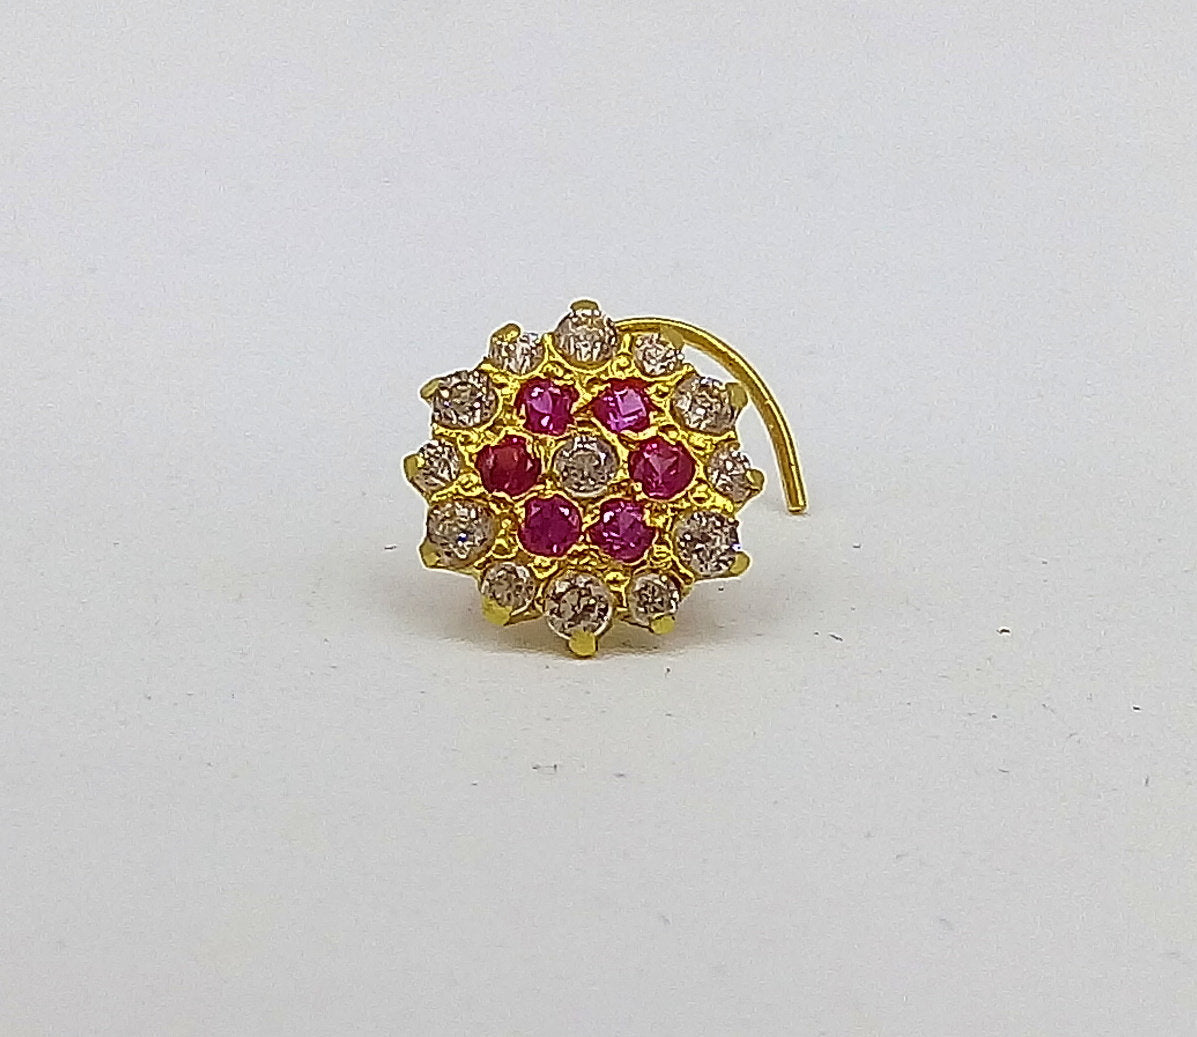 18k yellow gold handmade fabulous cubic zircon stone nose pin excellent antique vintage design tribal jewelry - TRIBAL ORNAMENTS